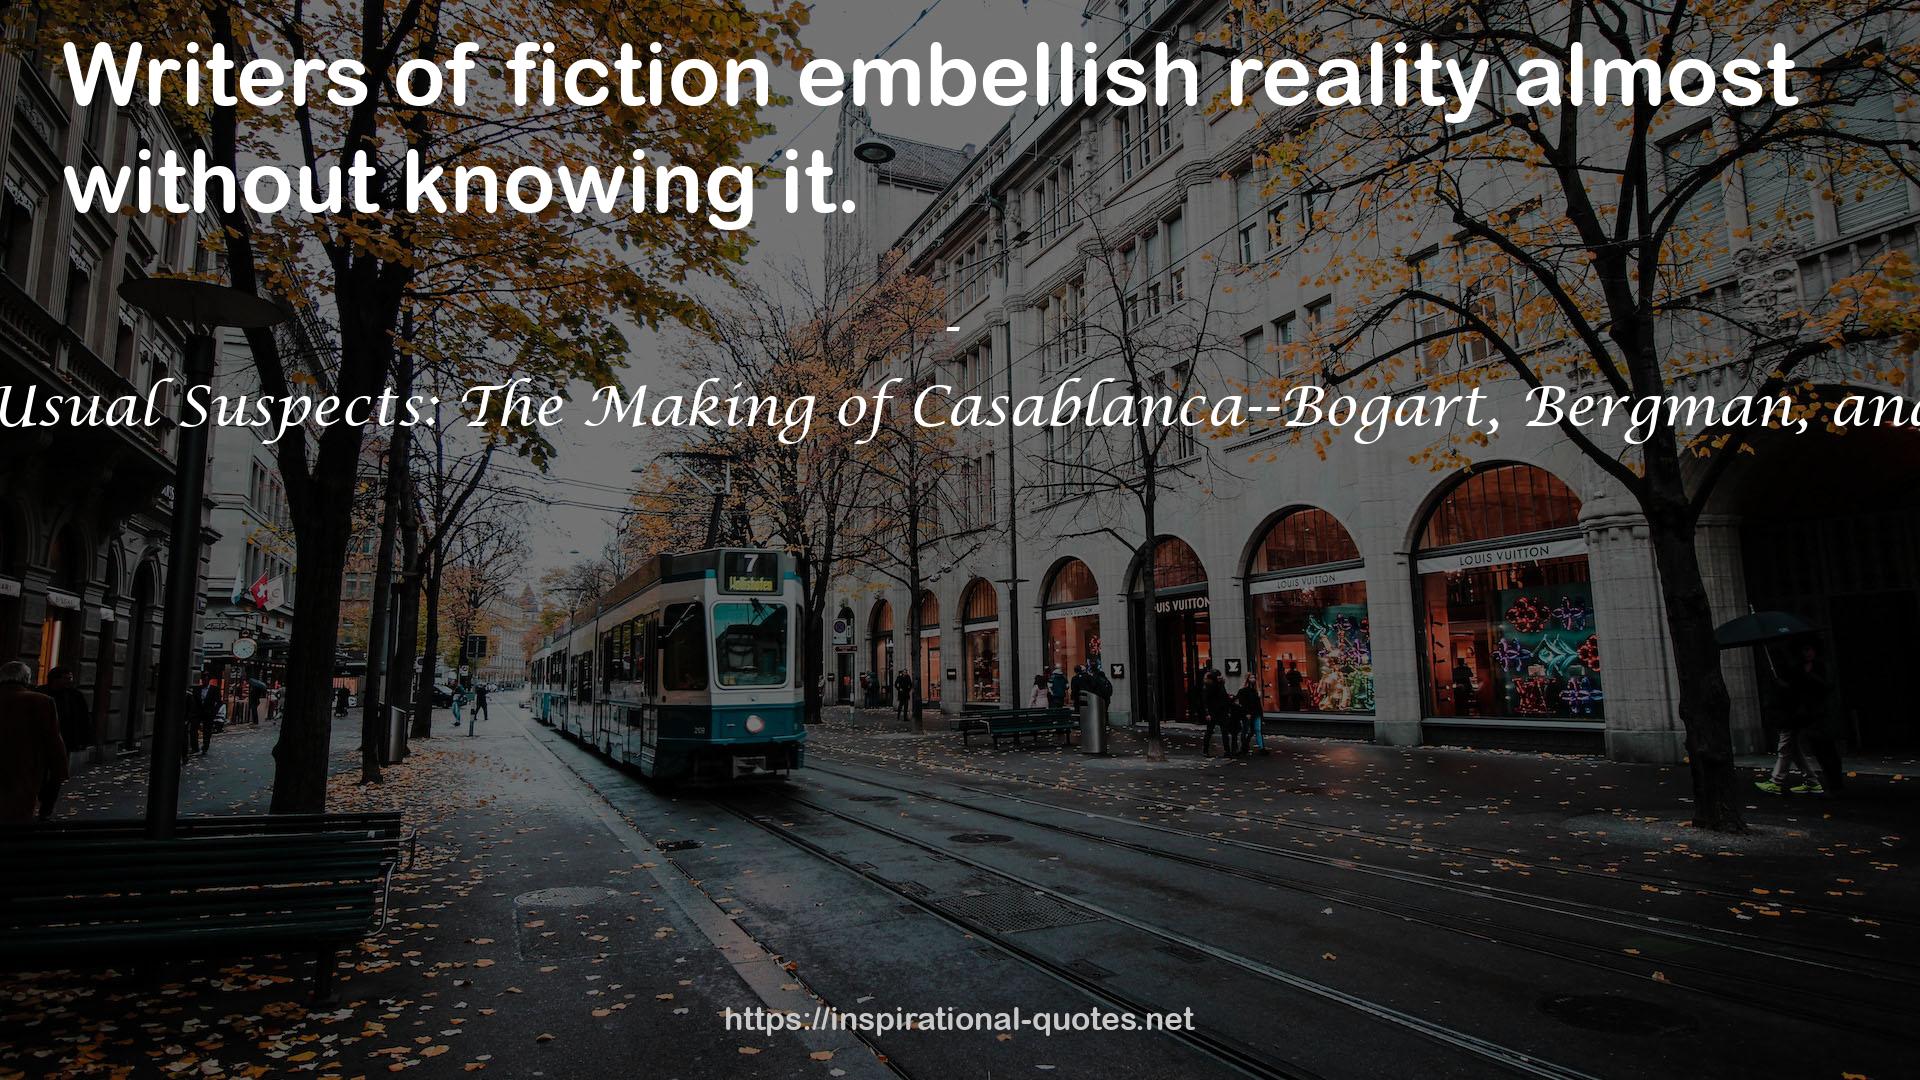 fiction embellish reality  QUOTES